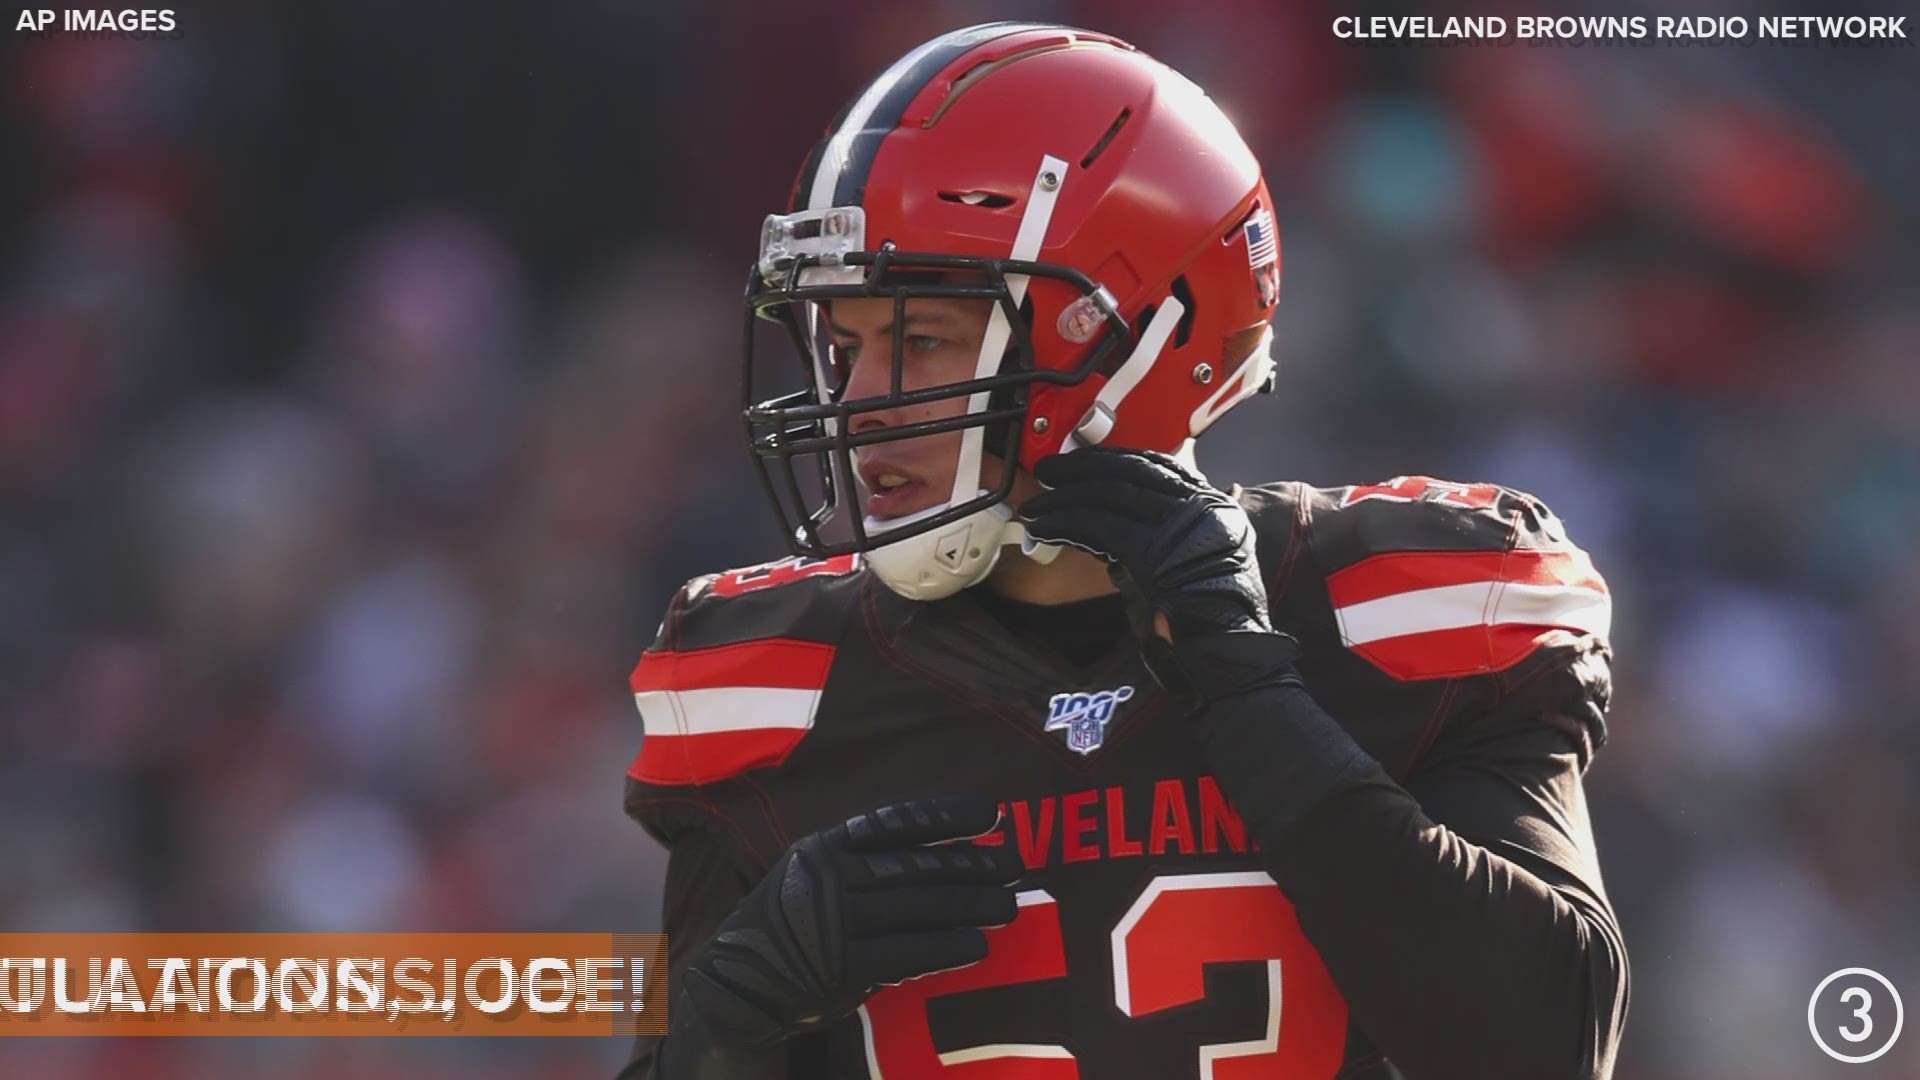 Congrats, Joe!  Joe Schobert was named the AFC Defensive Player of the Week for his effort in the Cleveland Browns' 41-24 victory over the Miami Dolphins.